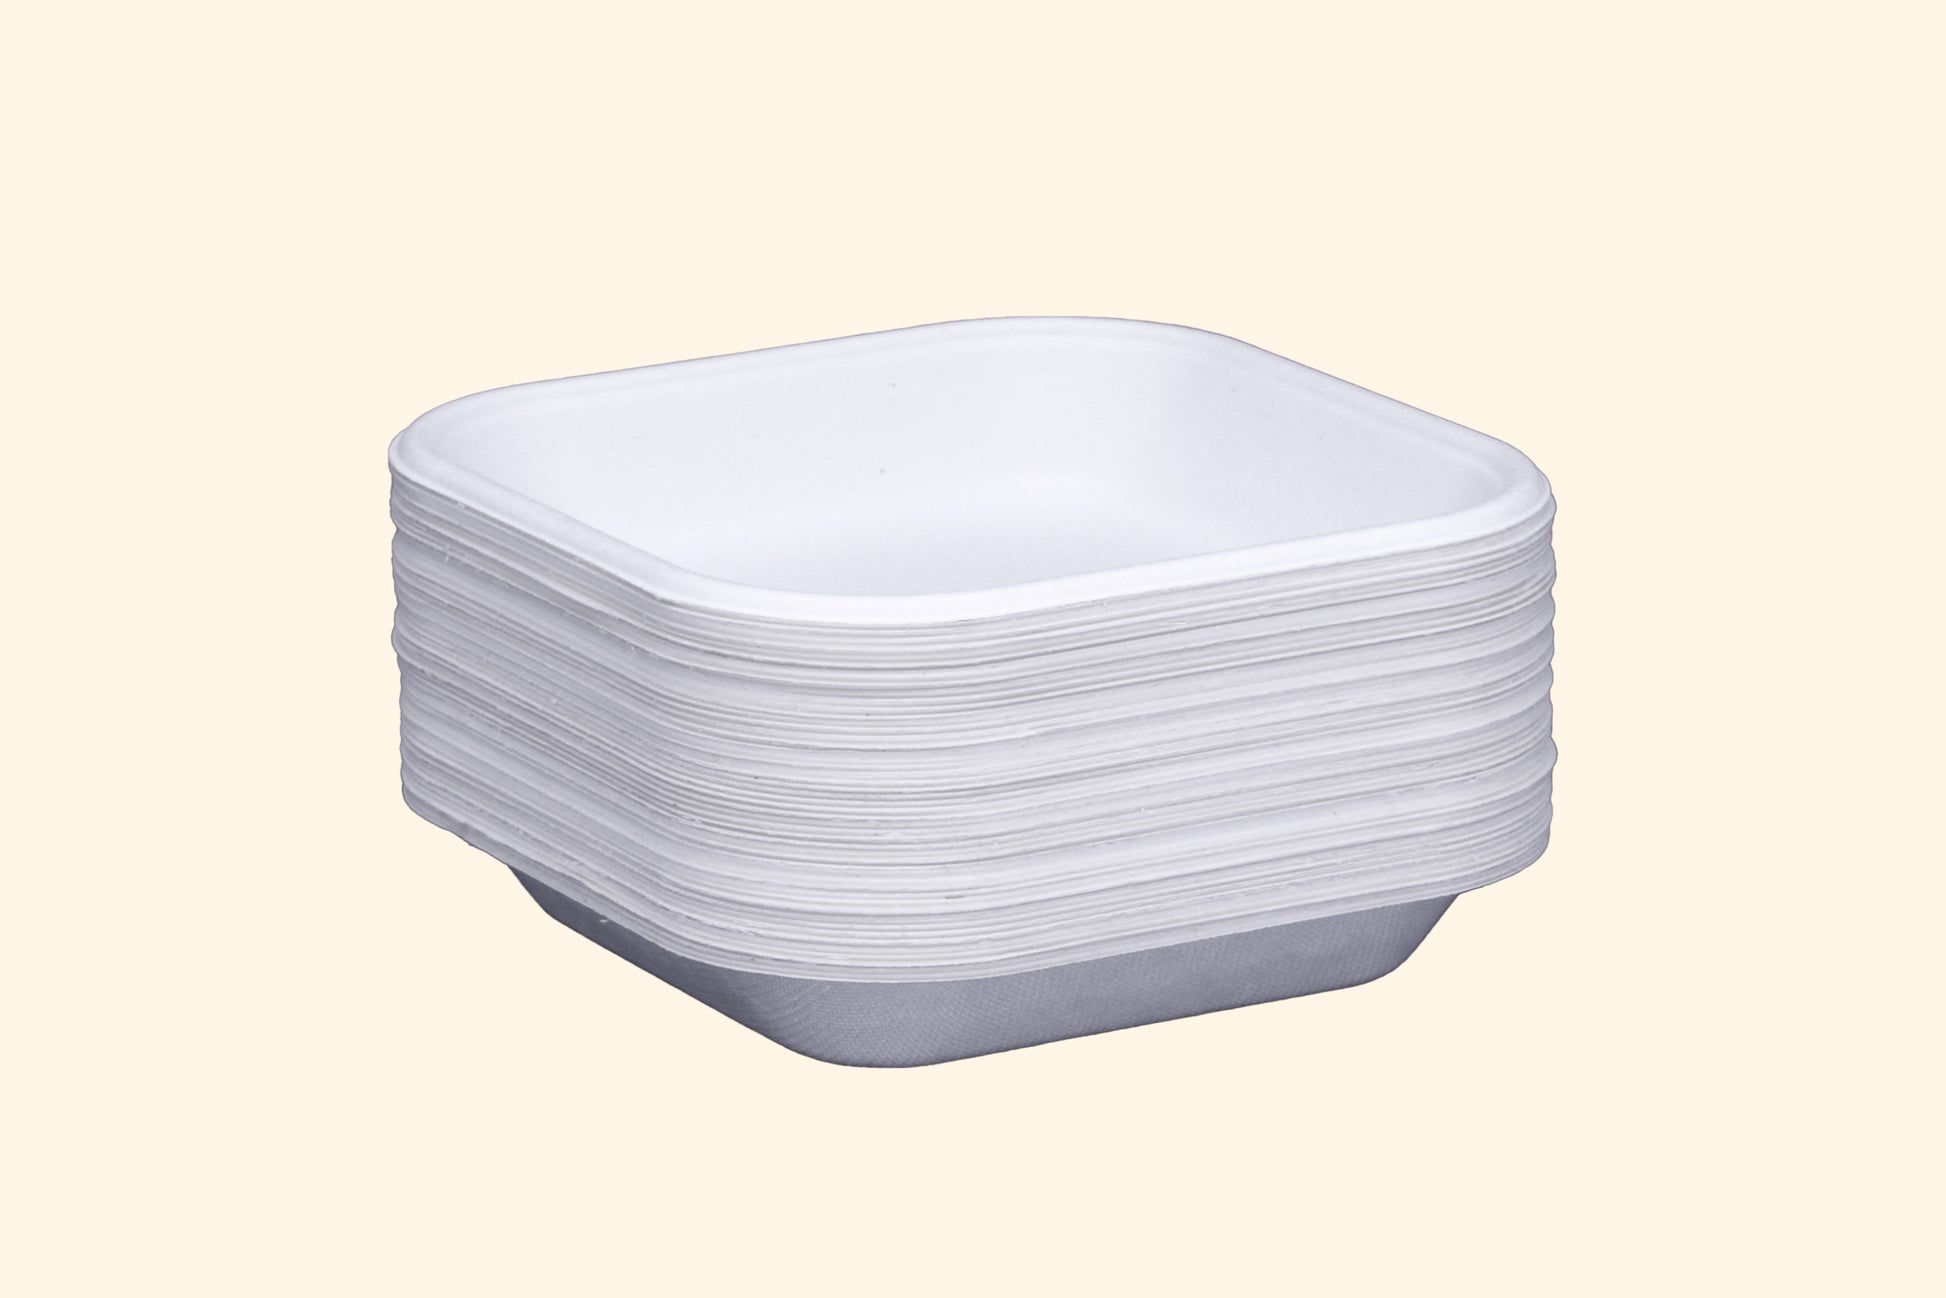 5-Inch-Square-Trays-Compostable-Sugarcane-Bagasse-Tray-Plate